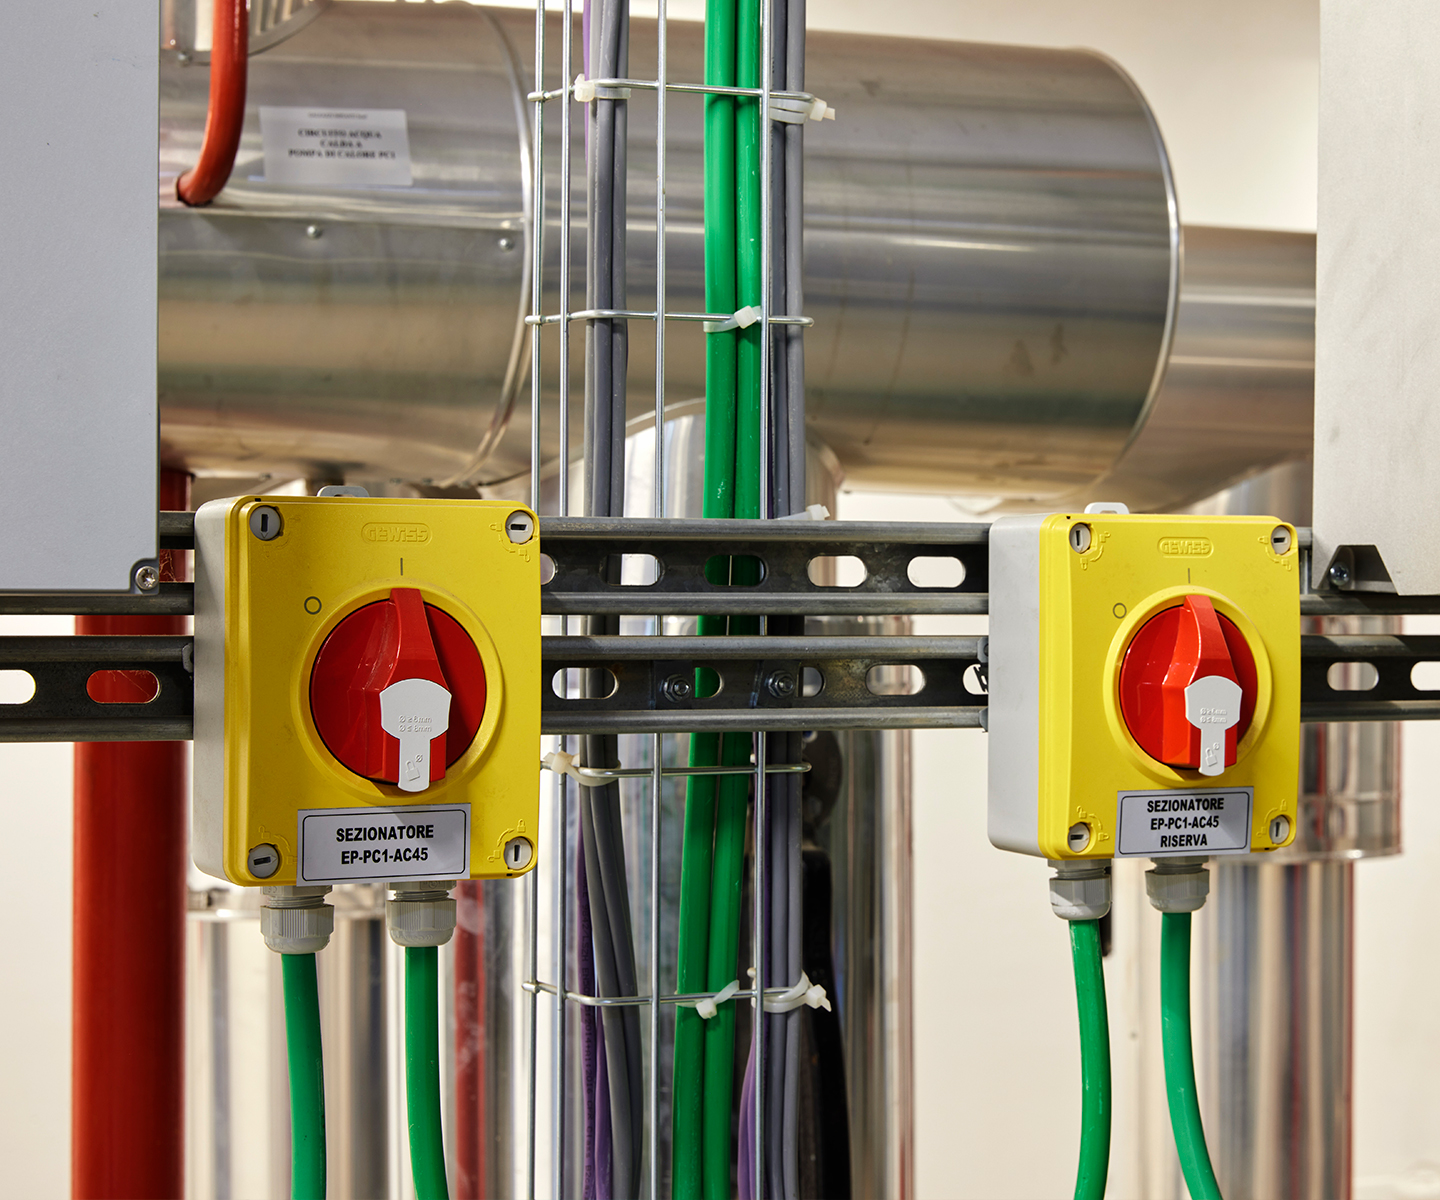 Detail of the Series 70 Rt Hp switch disconnectors installed at Galeazzi-Sant'Ambrogio Hospital.